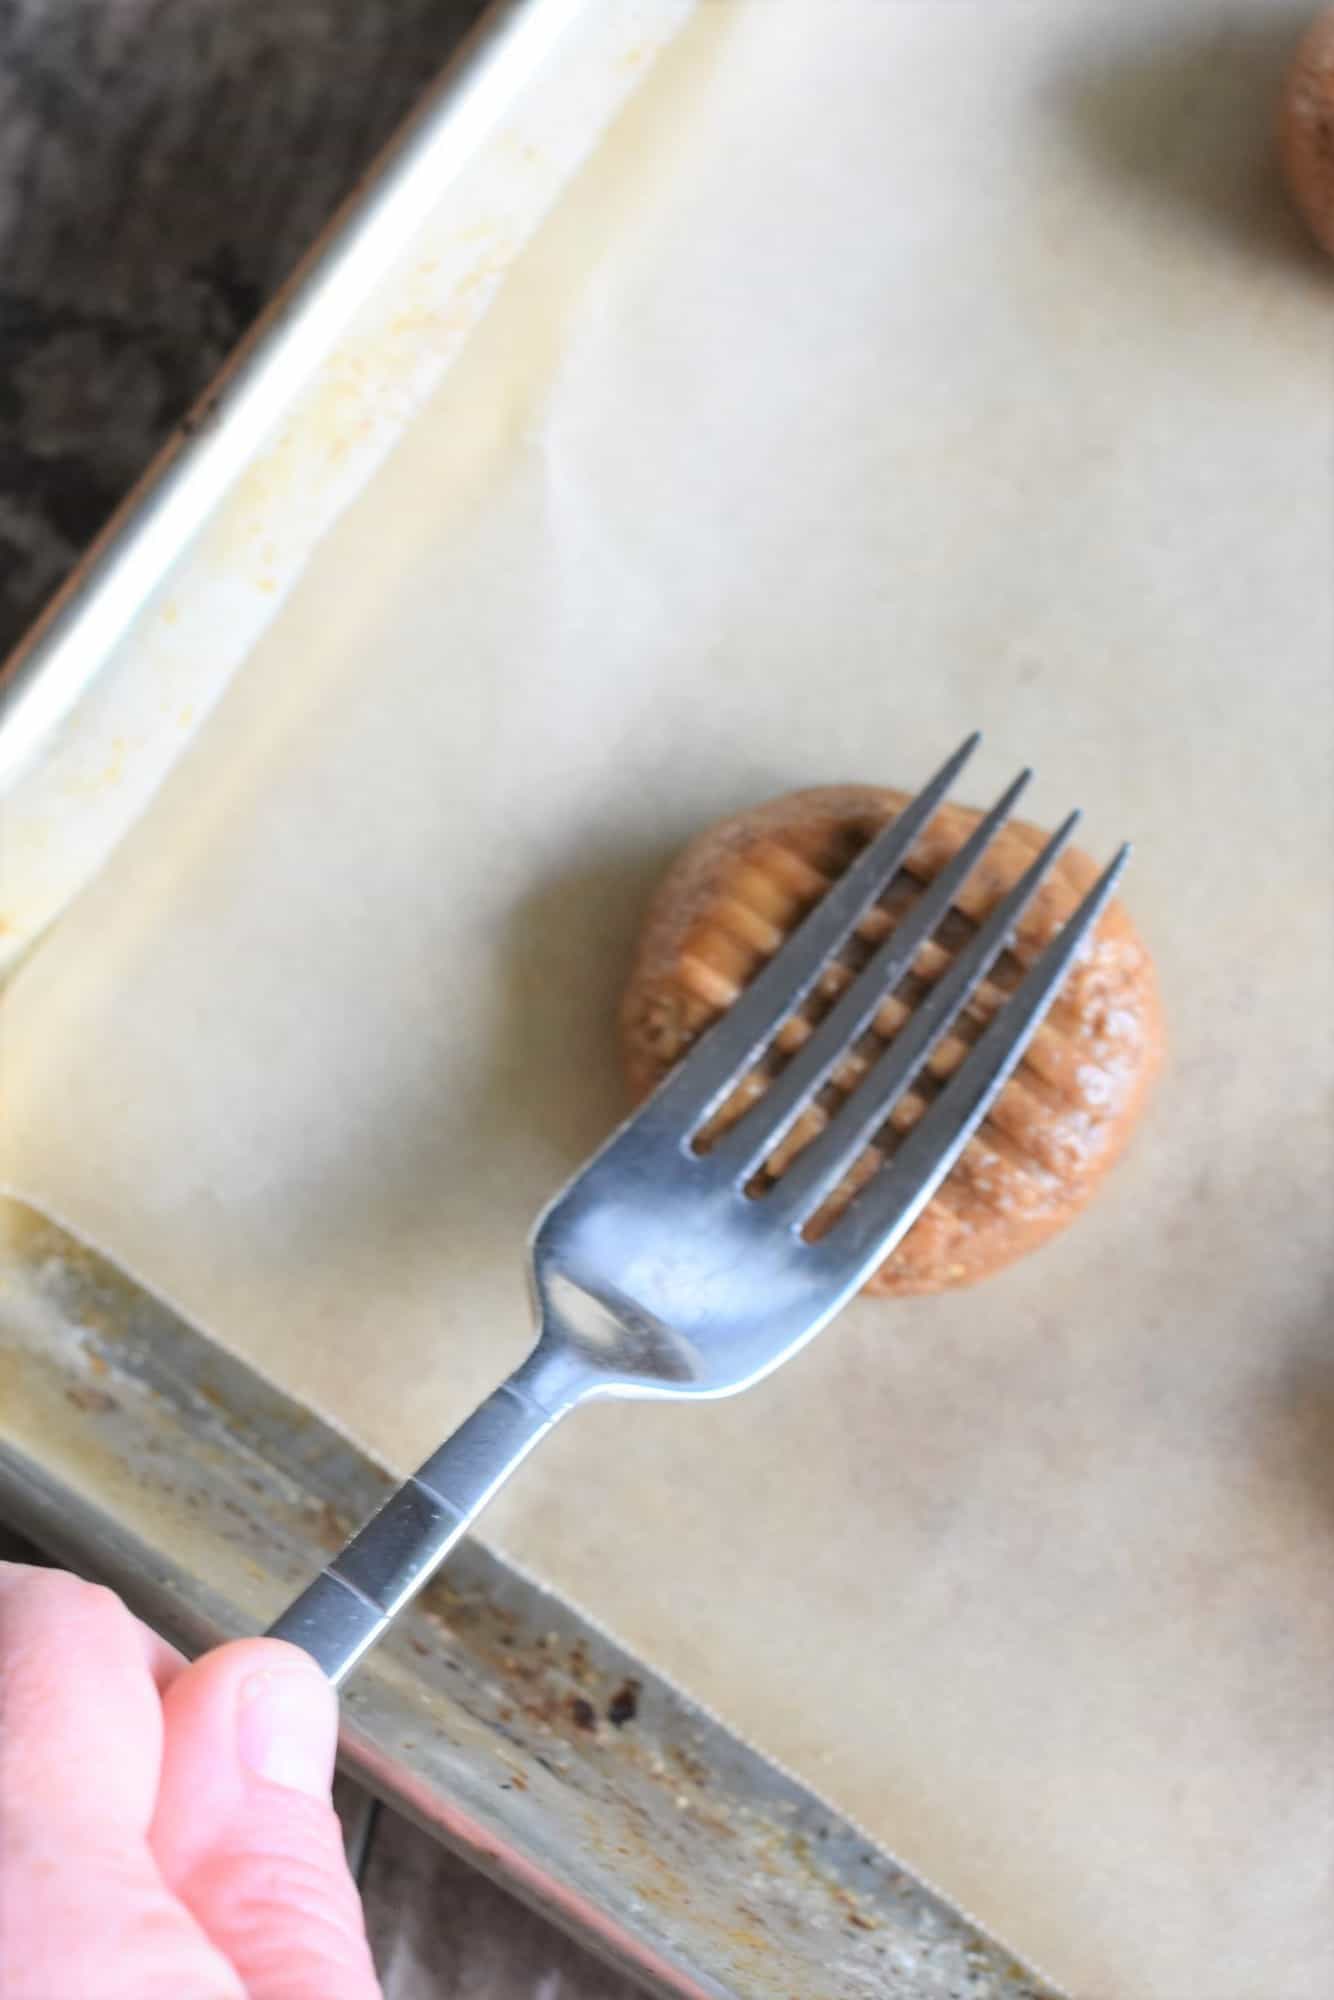 pressing down on one cookie dough ball with a fork going the other way